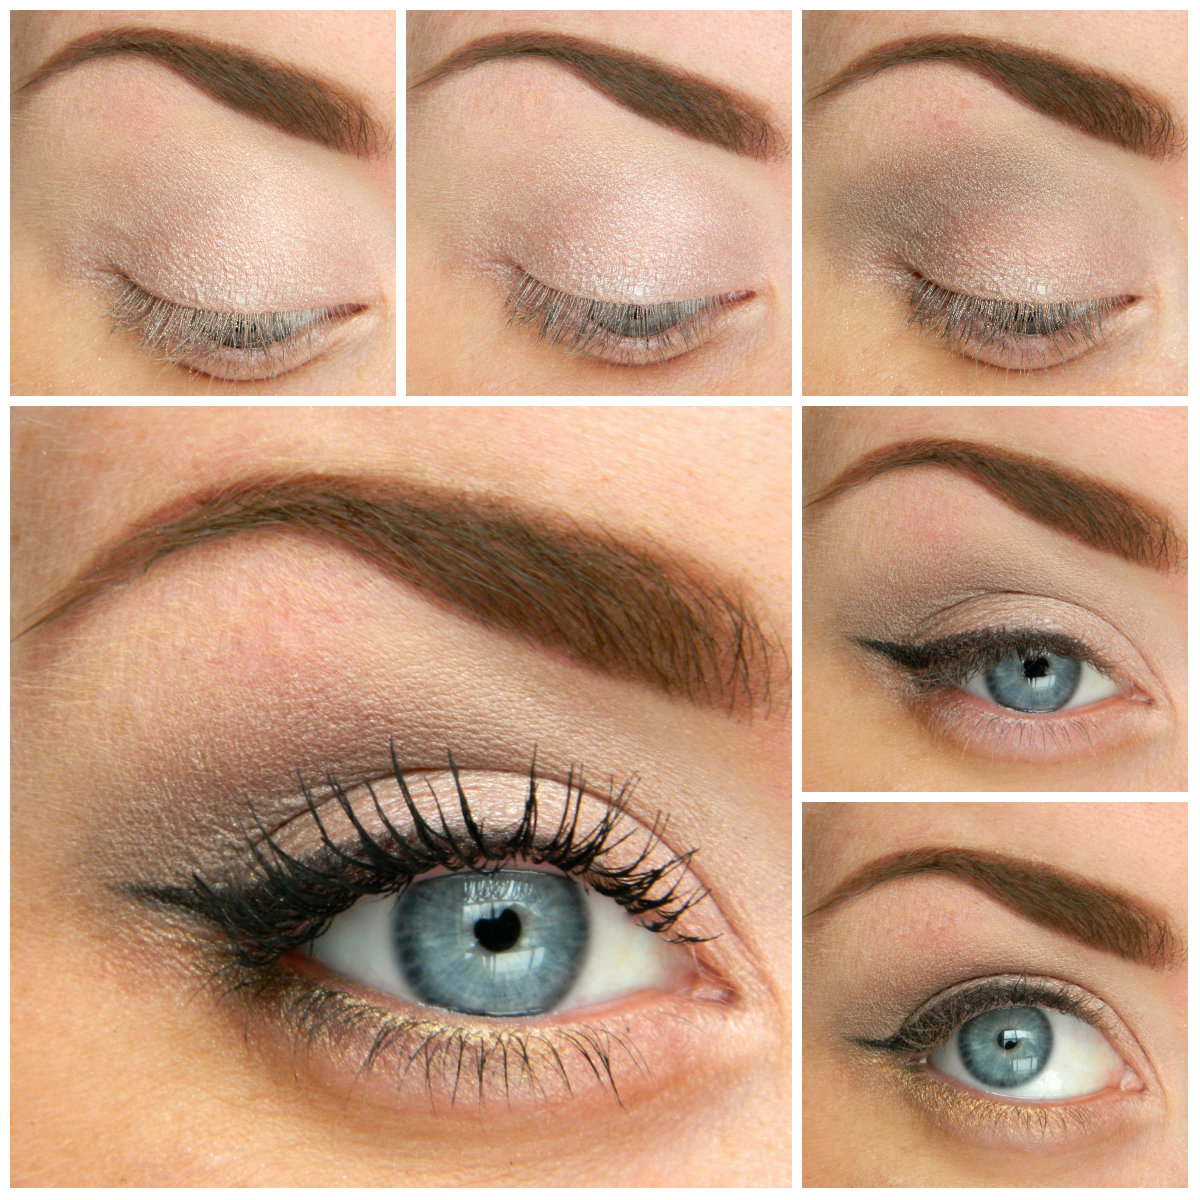 Simple Makeup For Blue Eyes 5 Ways To Make Blue Eyes Pop With Proper Eye Makeup Her Style Code